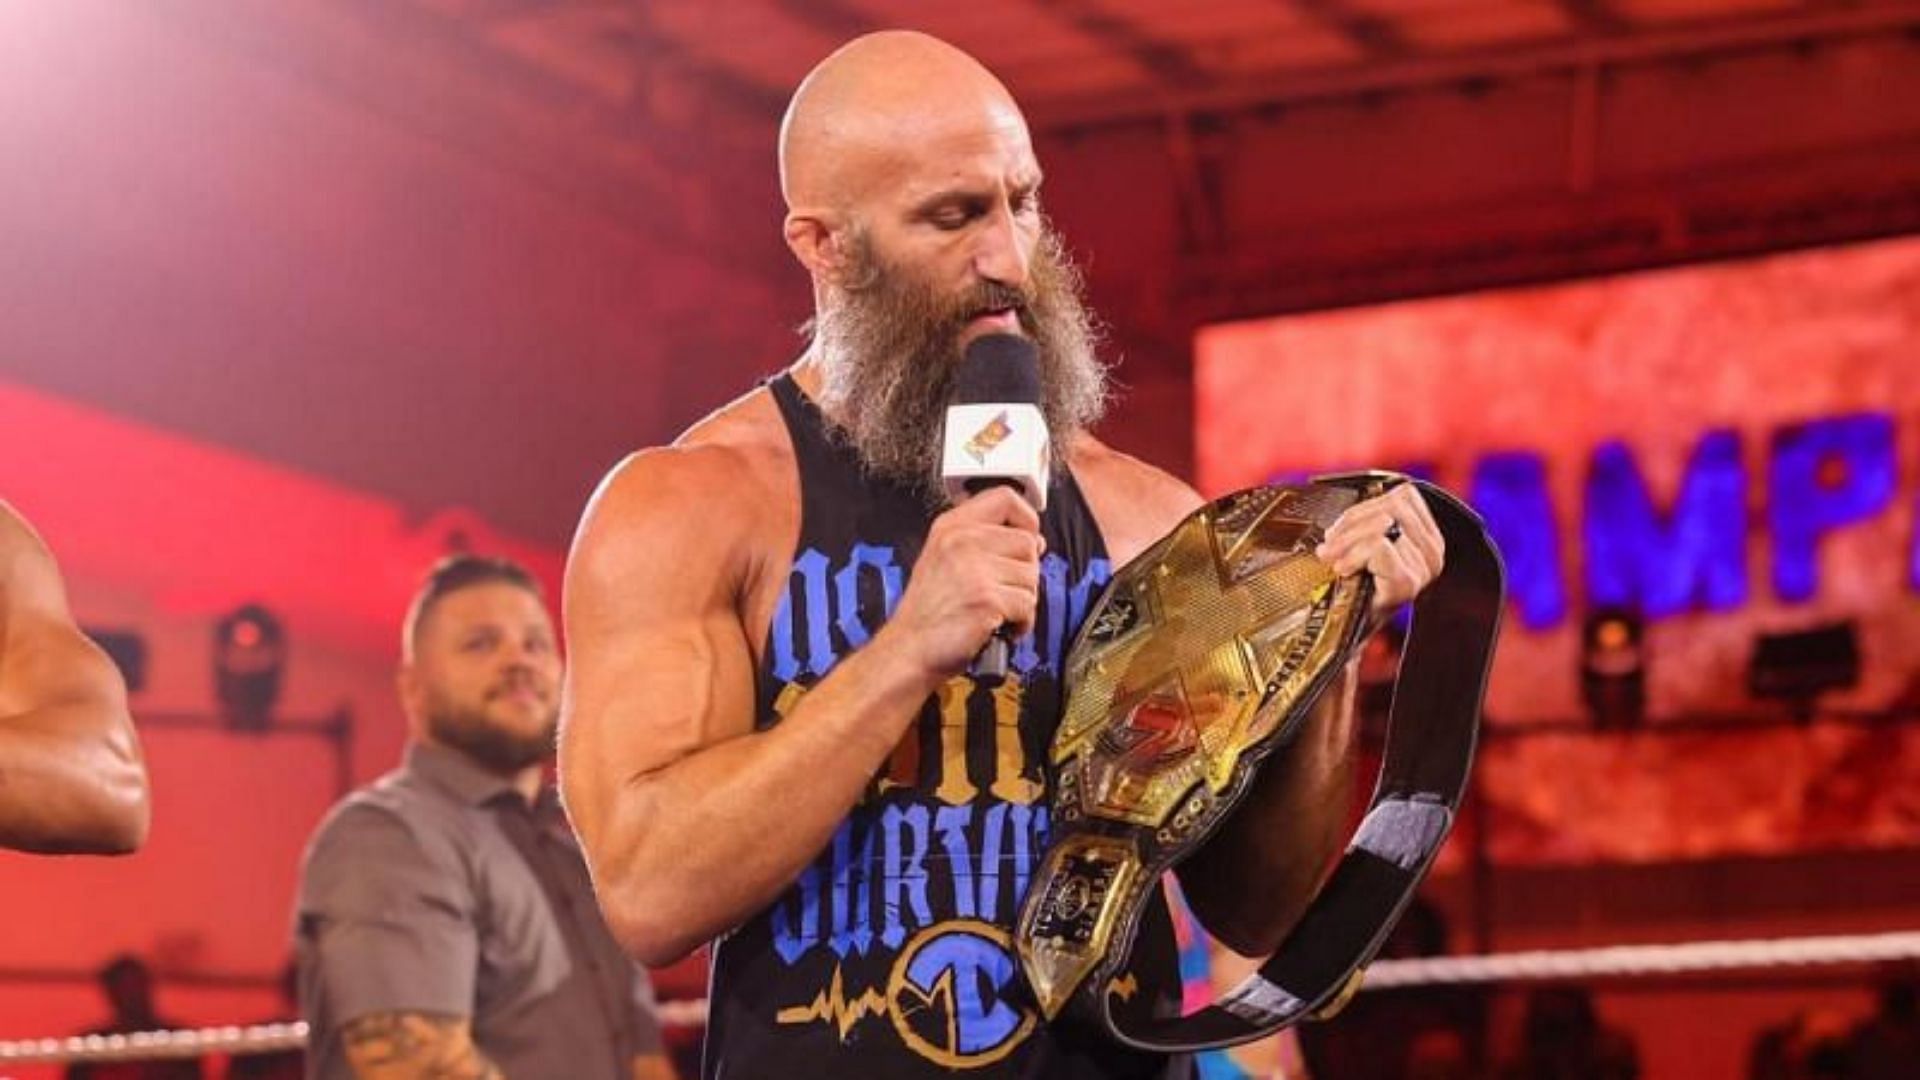 Tommaso Ciampa has been in NXT for 7 years.